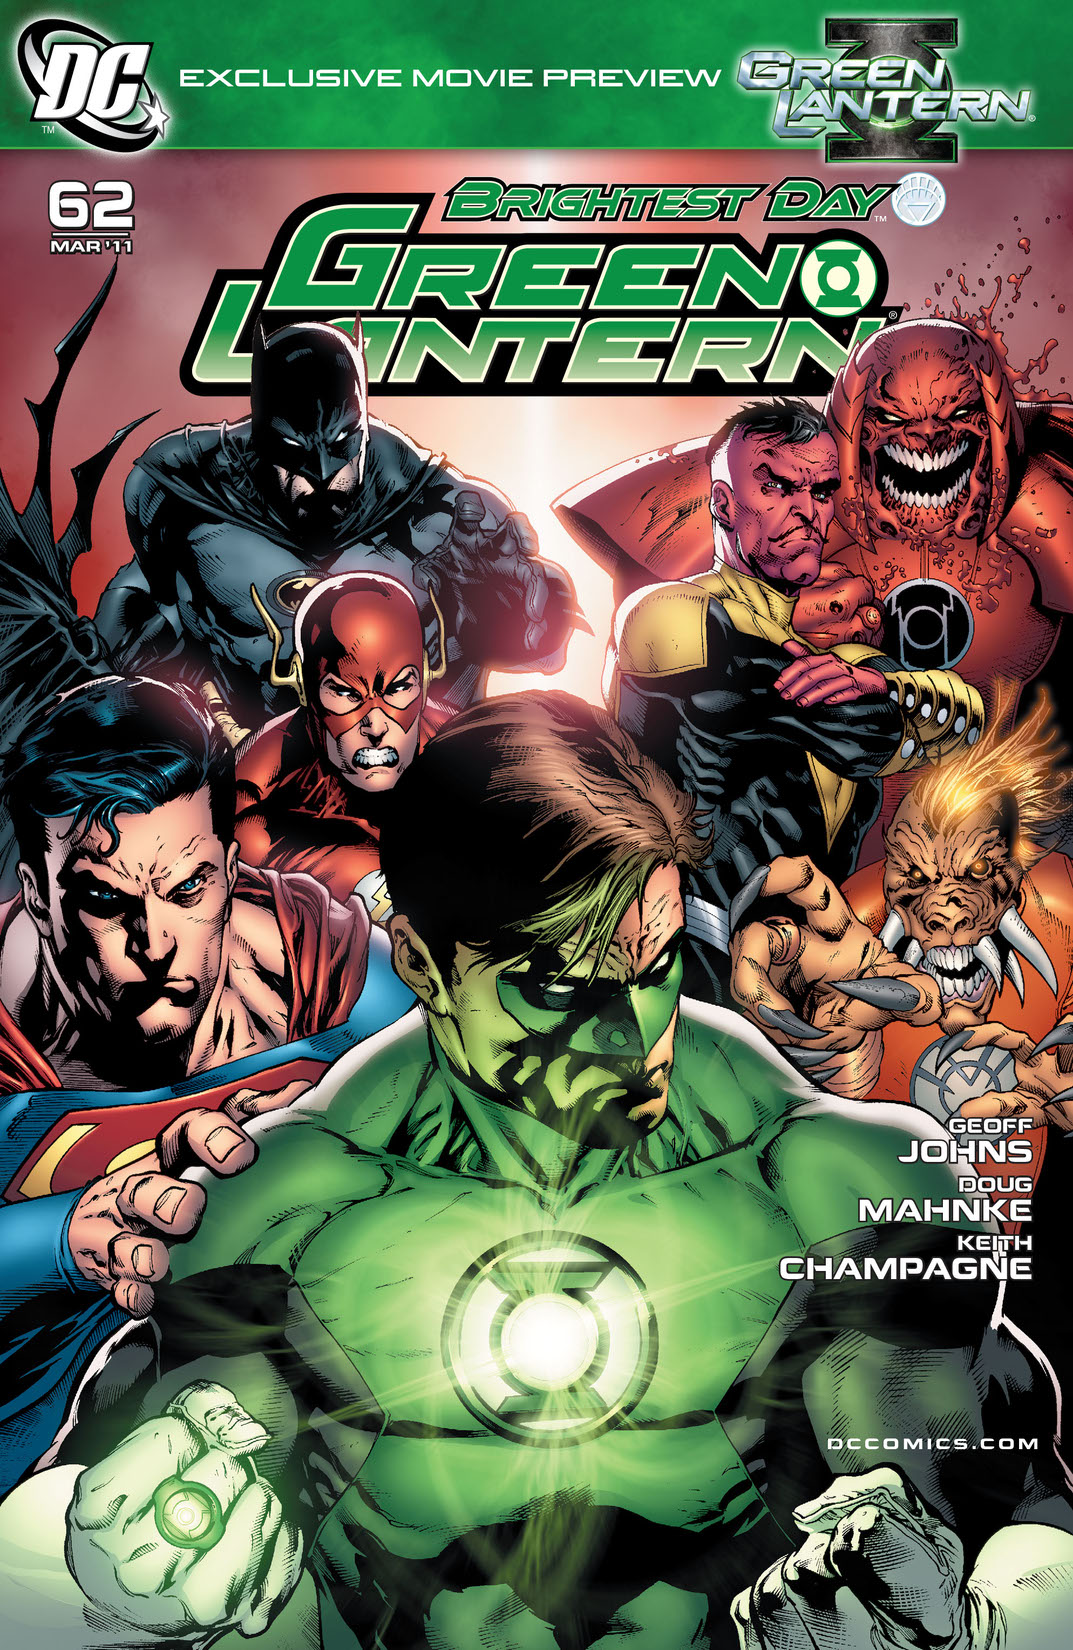 Green Lantern (2005-) #62 preview images